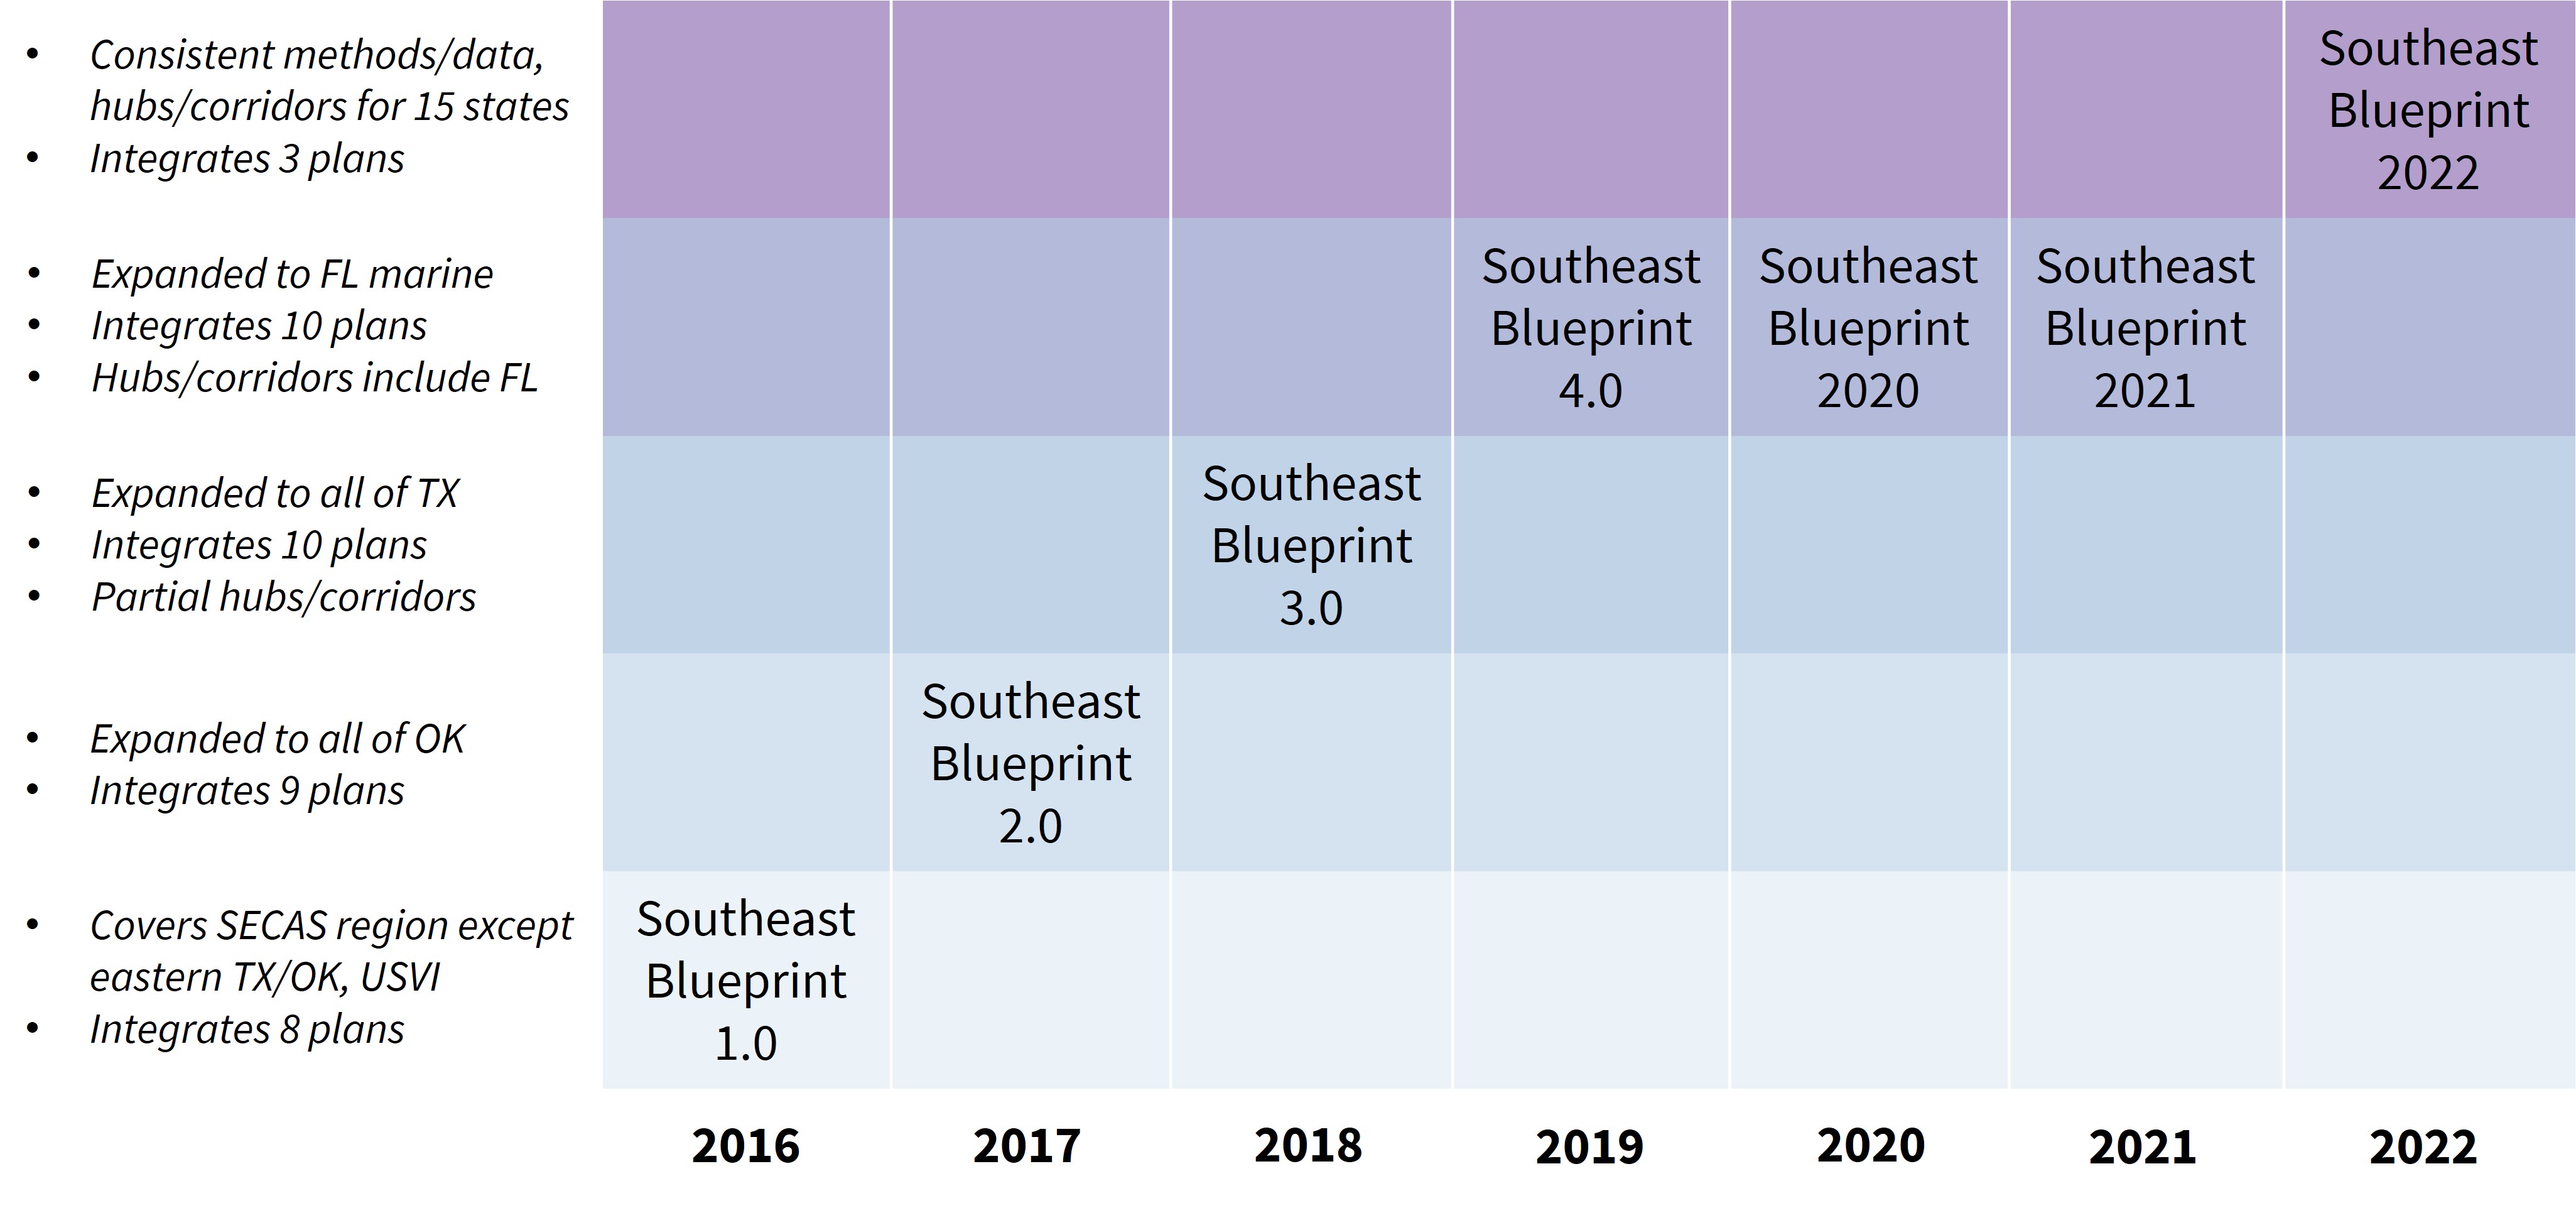 Table summarizing the major changes made by year, from Southeast Blueprint 1.0 in 2016 to Southeast Blueprint 2022 in 2022.